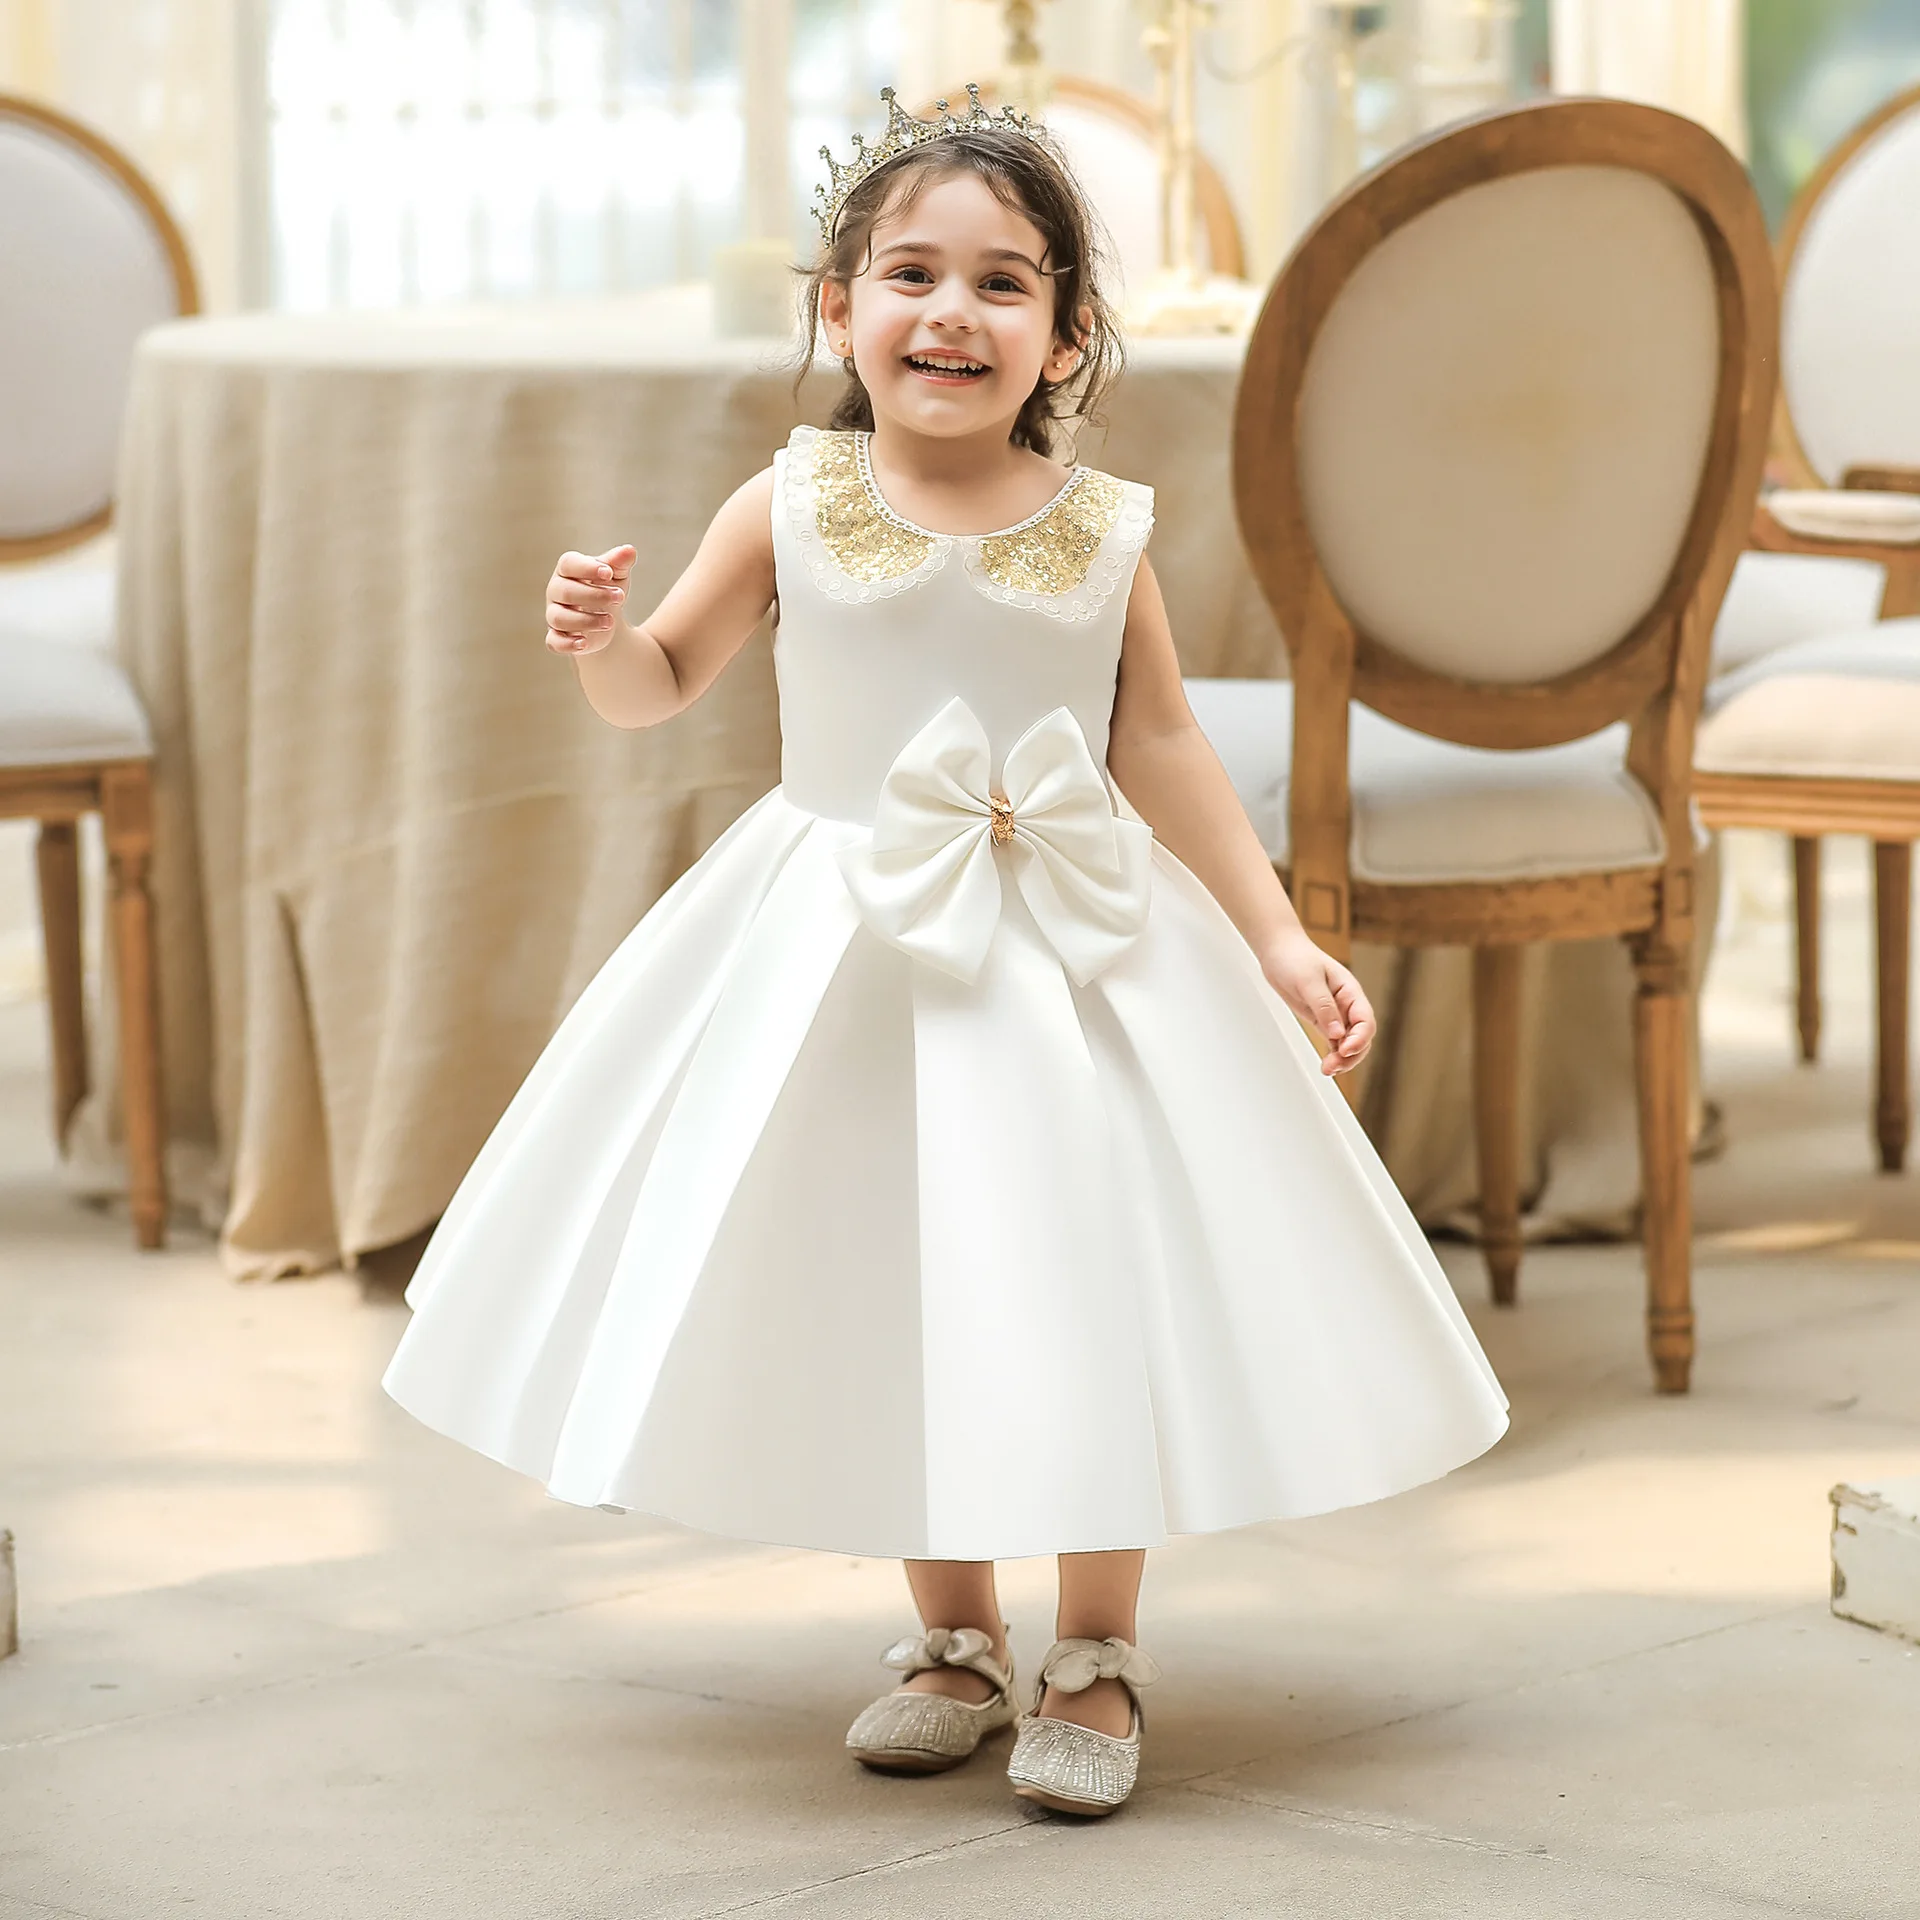 

FSMKTZ Toddler Baby First Communion Baptism Princess Dress 1st Birthday Party Dress For Baby Girl Wedding Christening Prom Gown